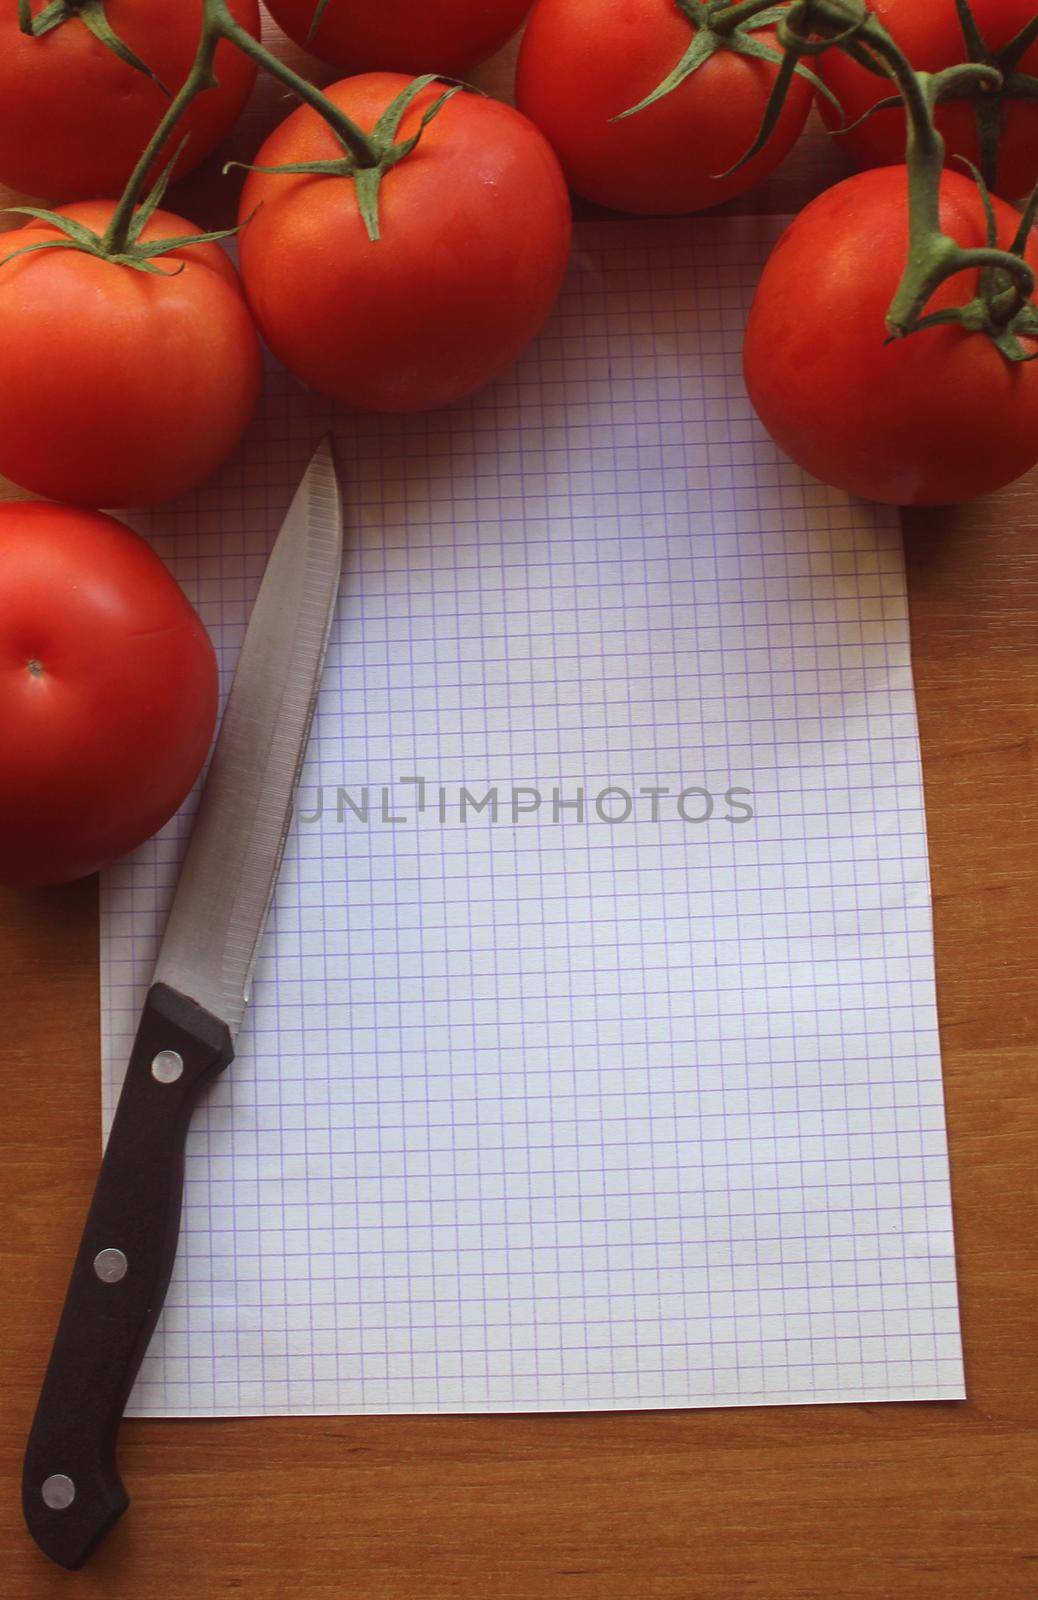 tomatoes on a wooden background with sheet of paper and knife by JackyBrown